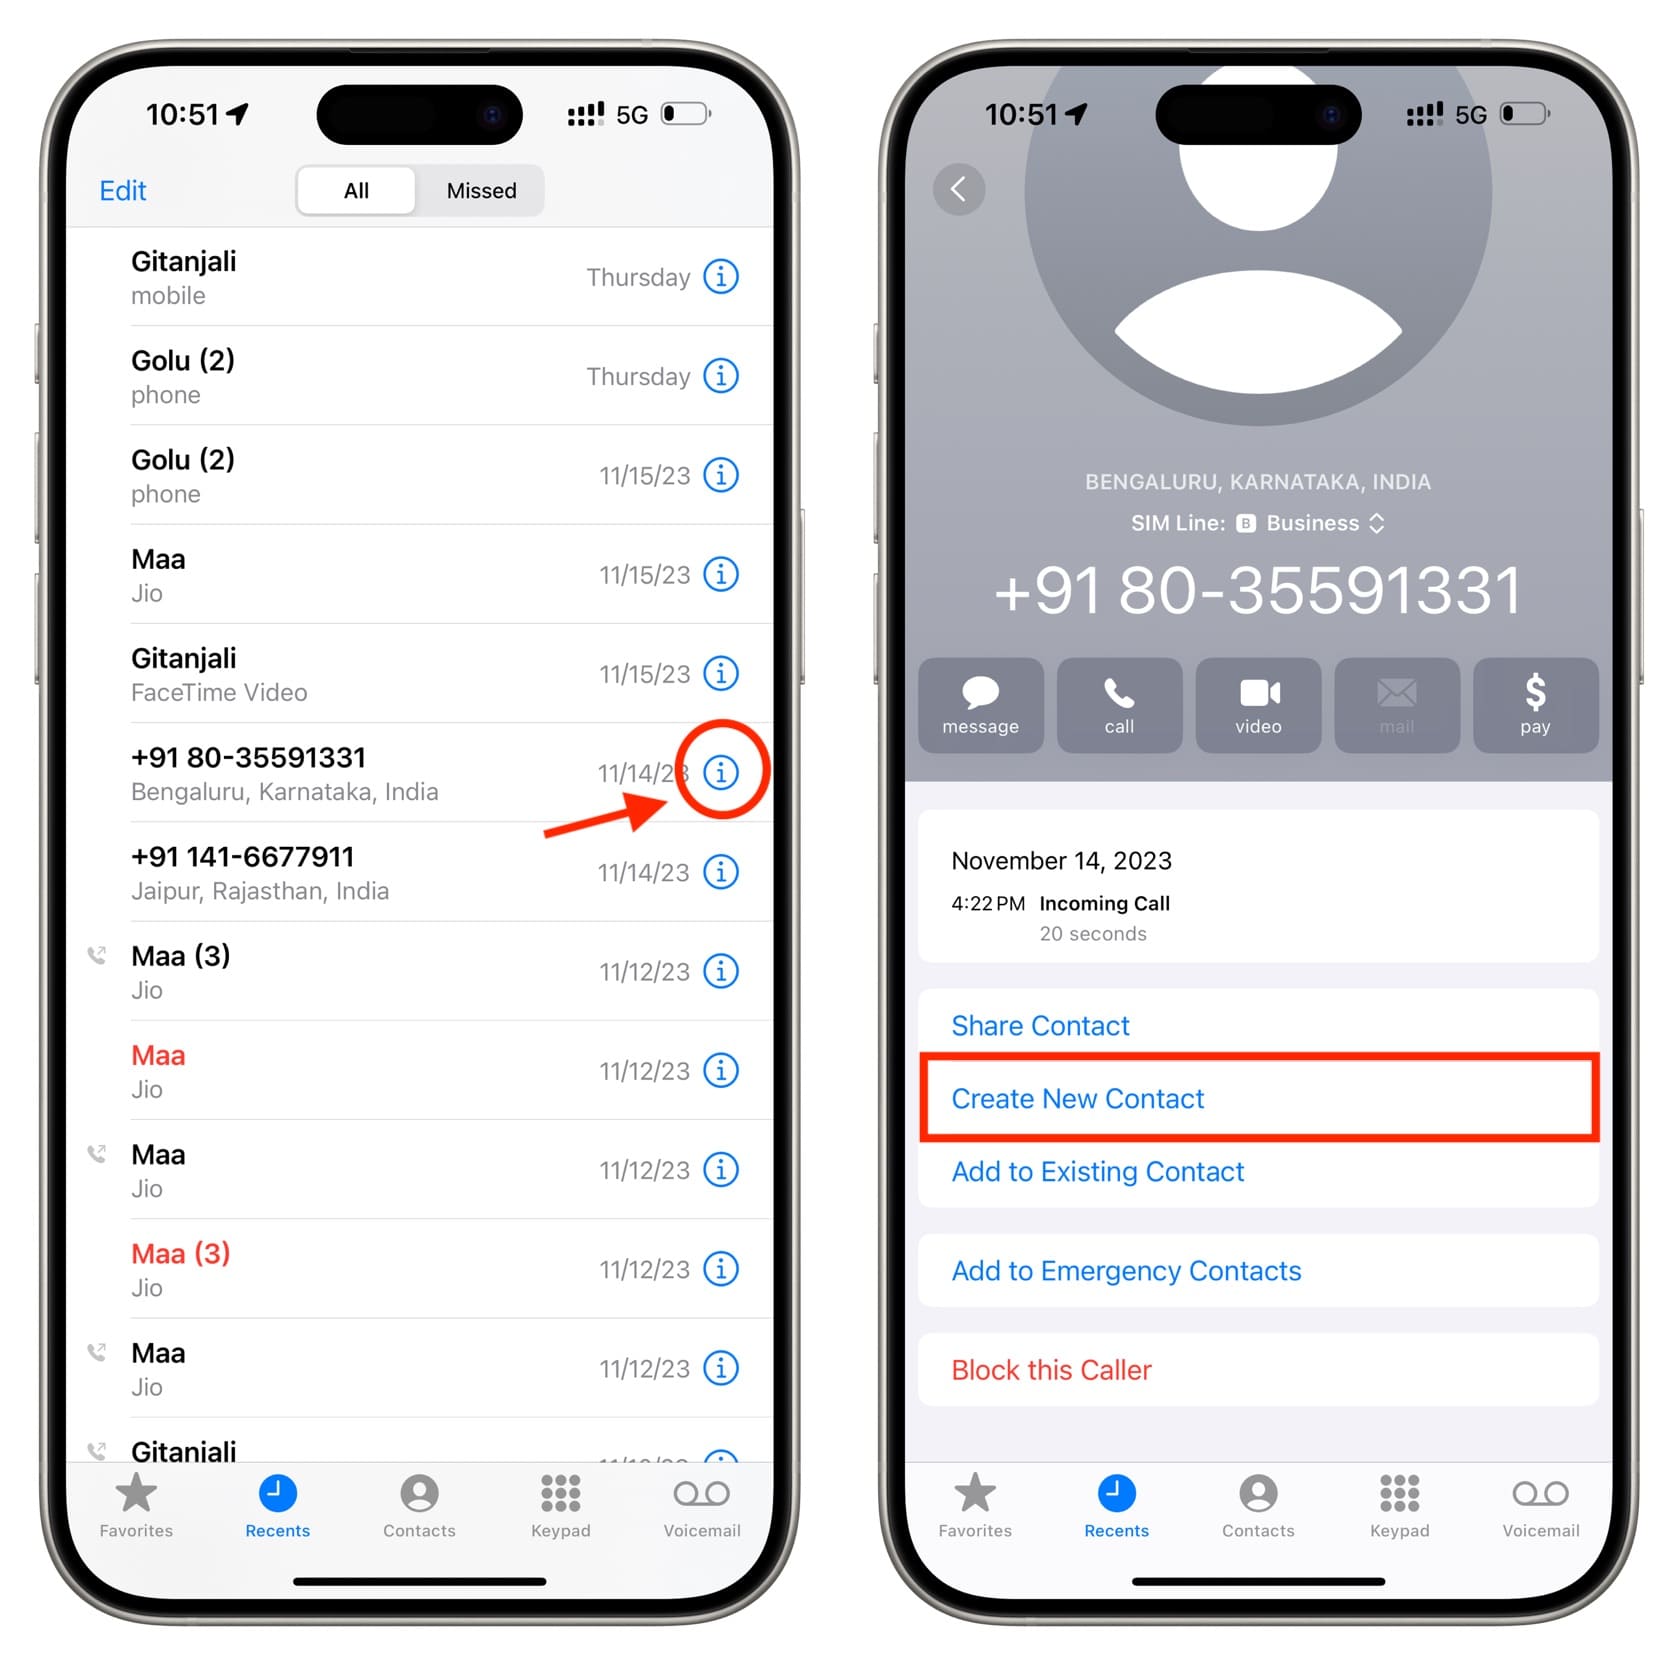 Save a recent call as new contact on iPhone